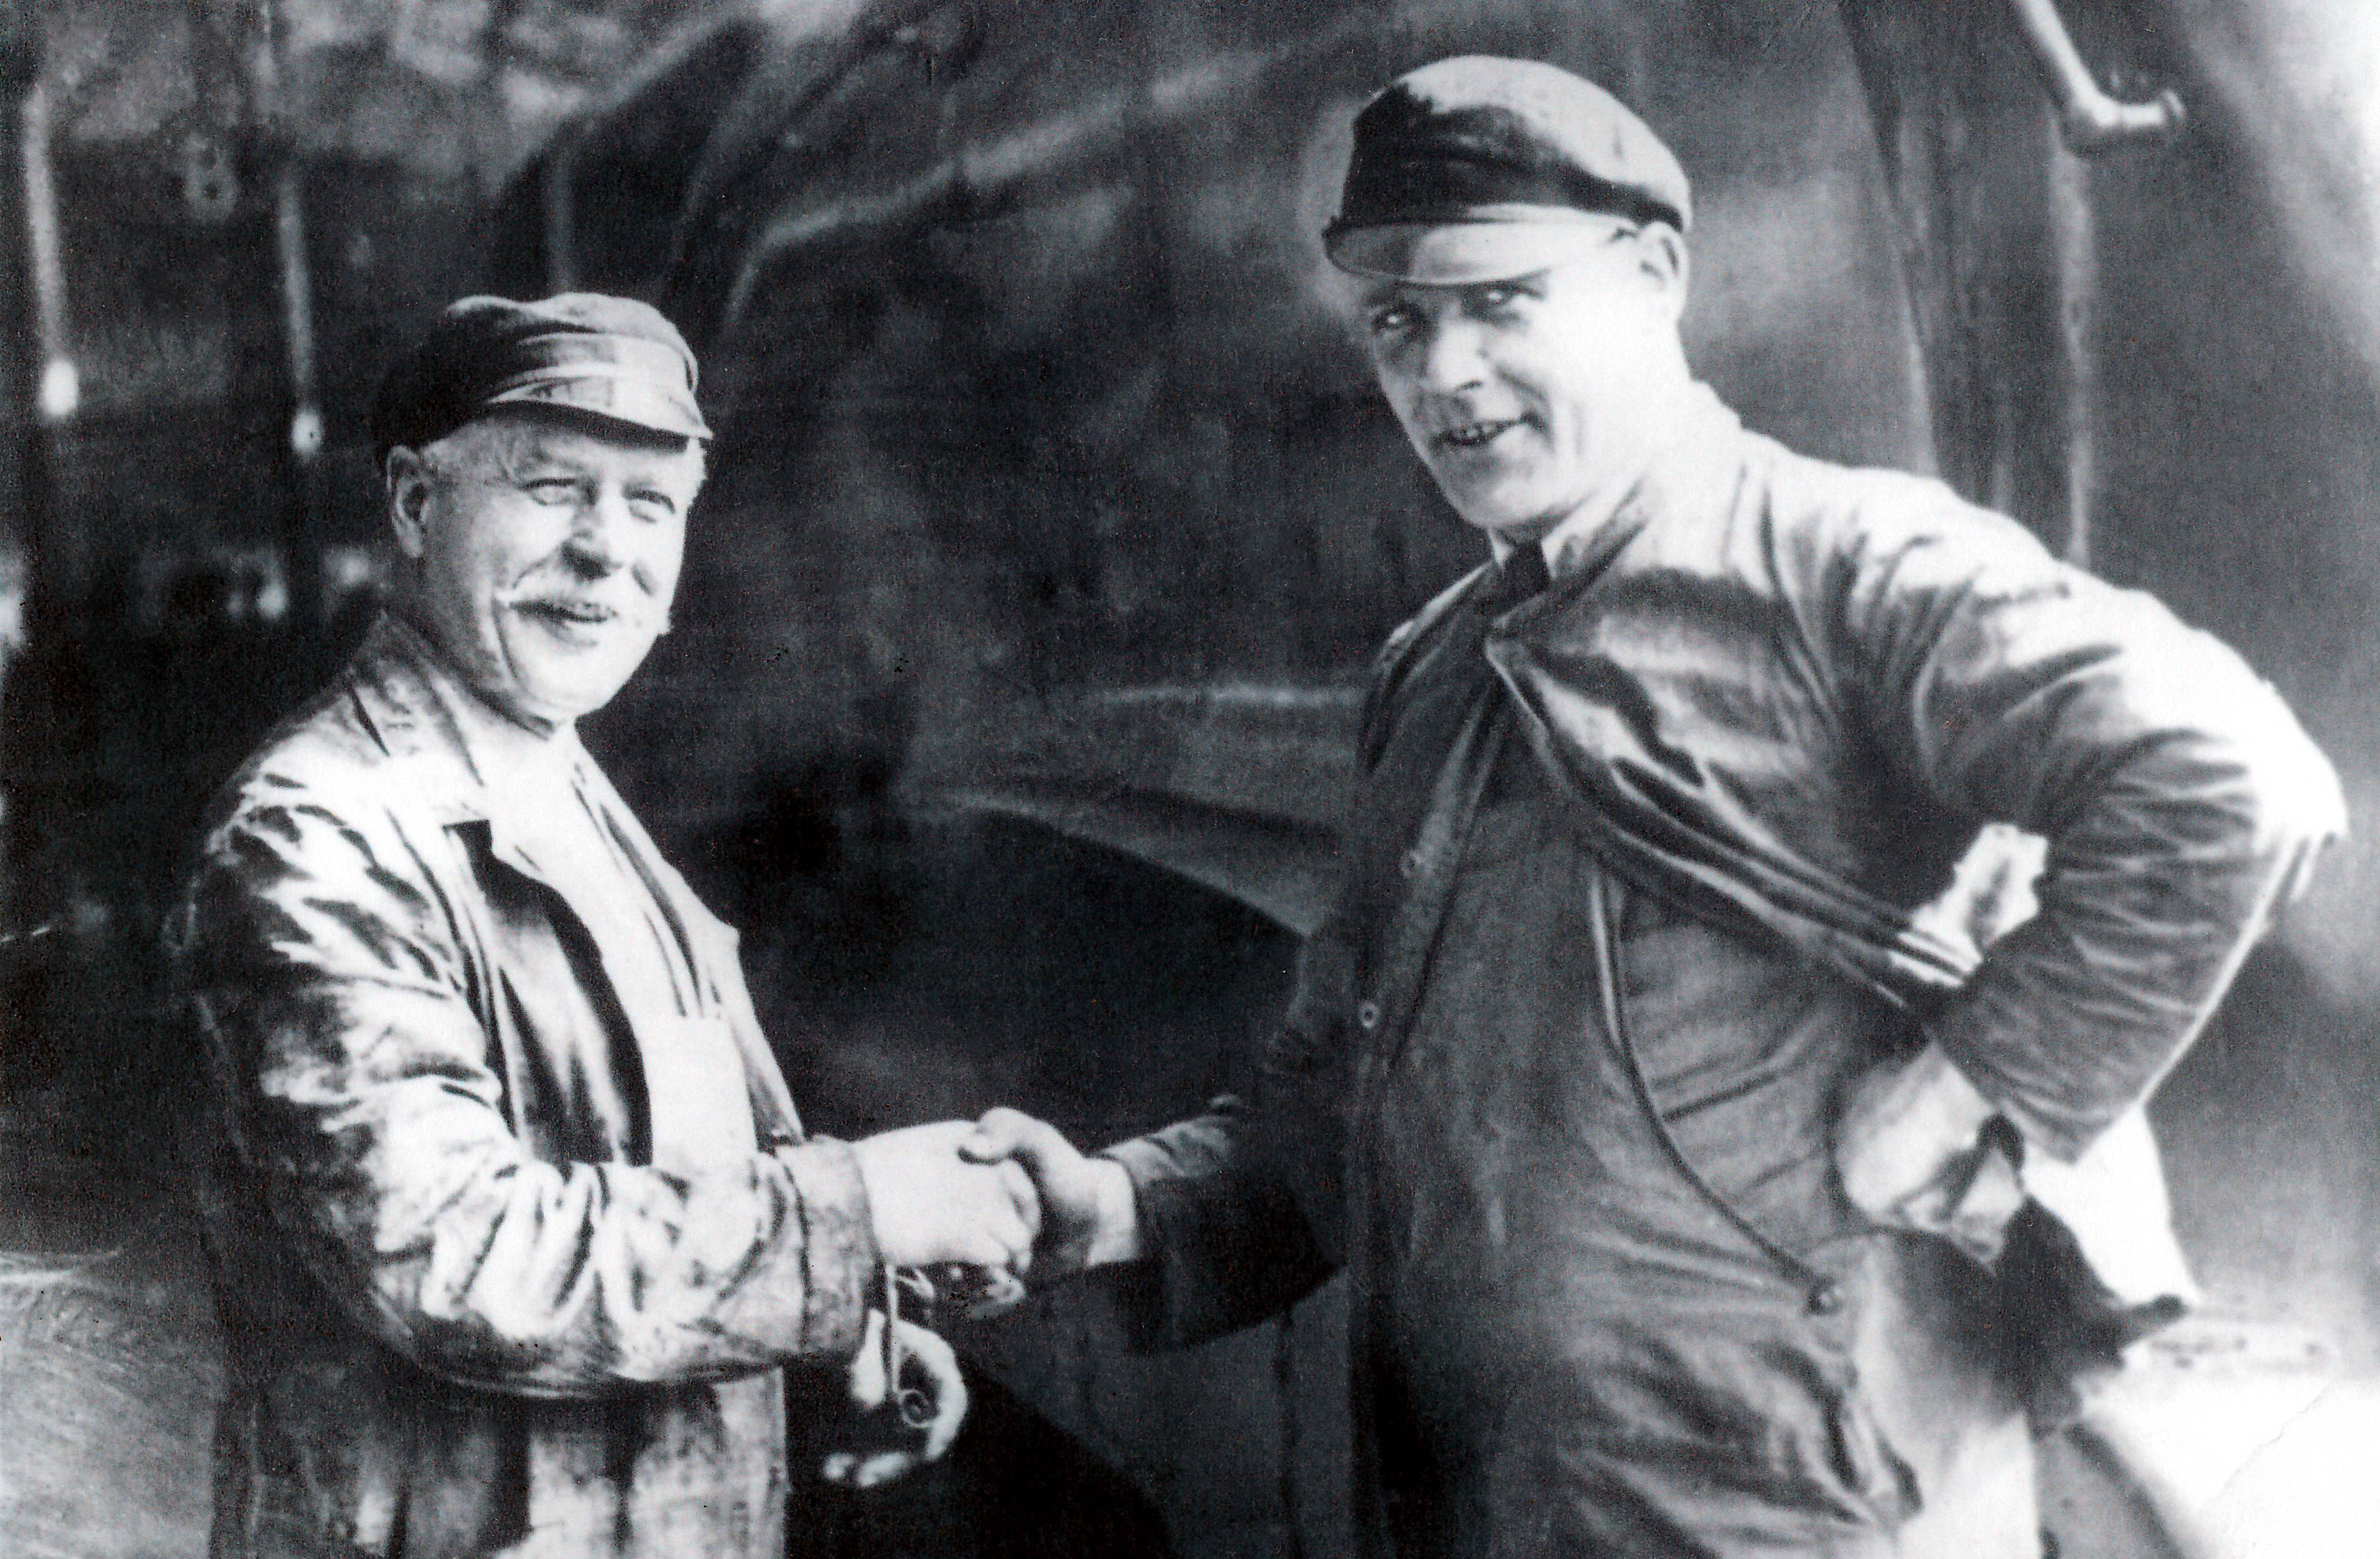 George Haygreen (left) on his retirement day with Charlie Fisher